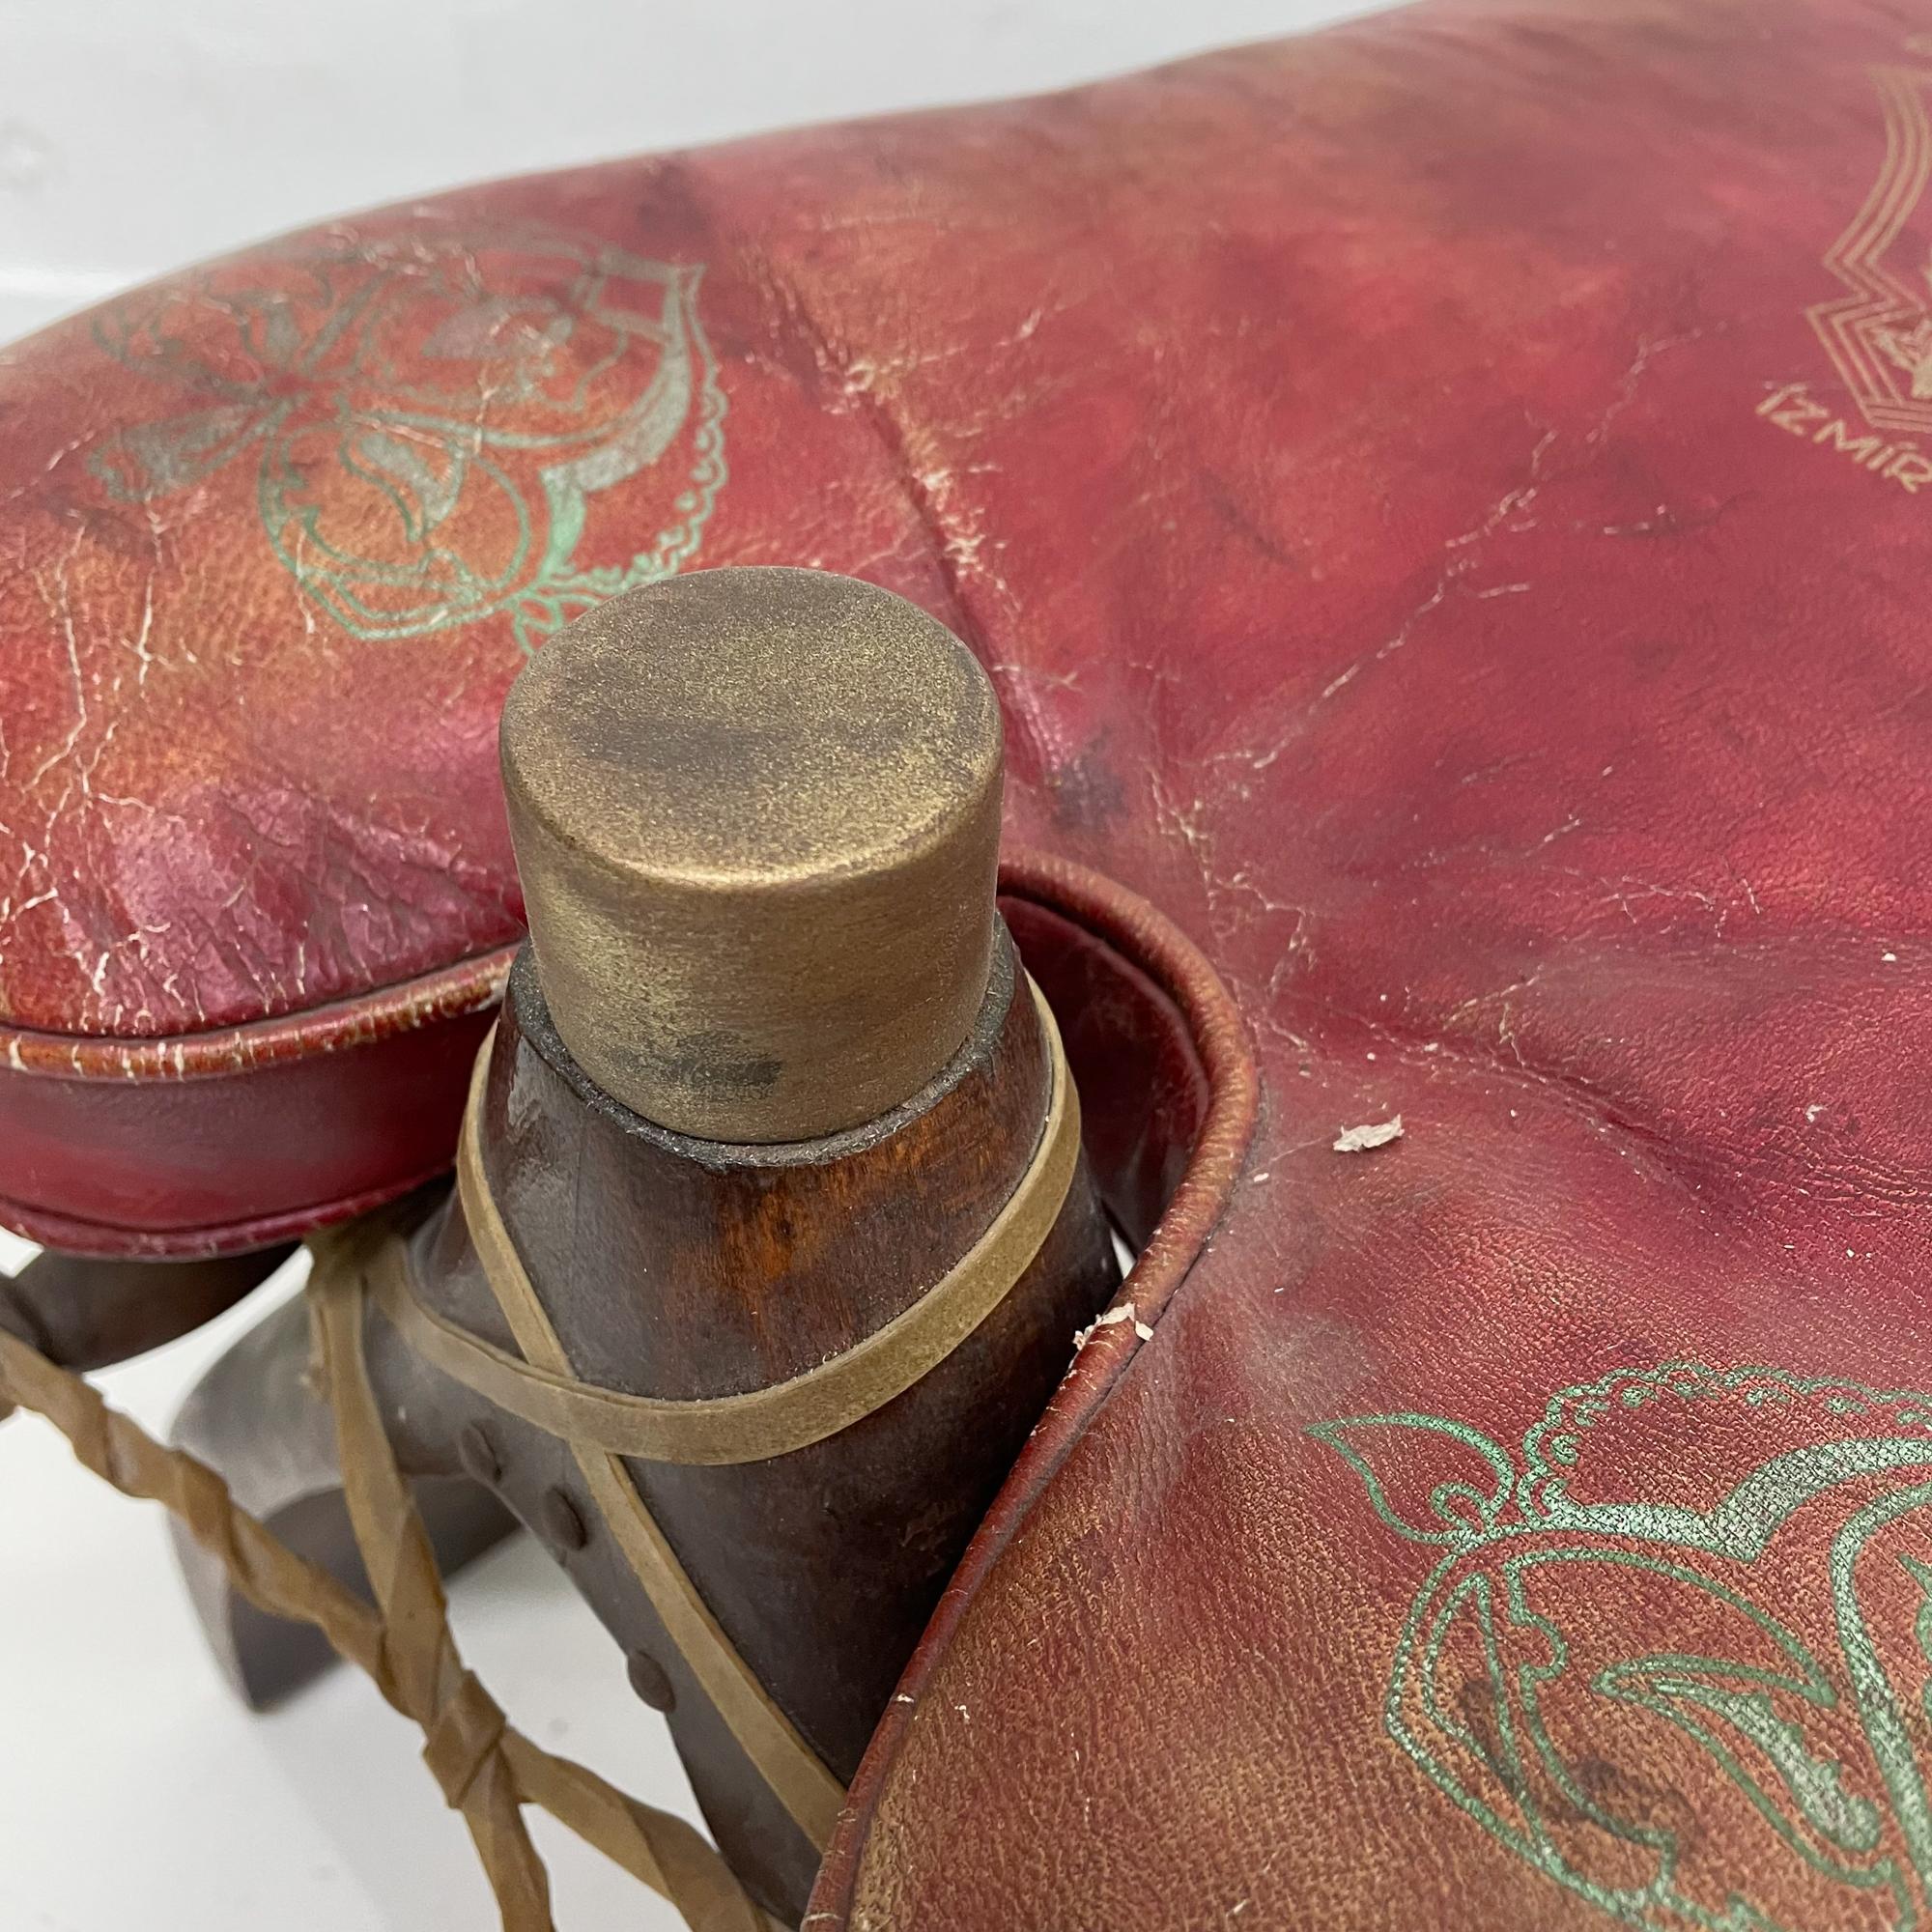 Red Foot Stool
Fabulously Distressed Vintage IZMIR camel Ottoman Foot Stool in Wood Goatskin & Metal with distressed Red Leather Cushion. Includes lovely graphics on leather. Stamped Izmir.
Measures: 13 H x 26 W x 14 D inches
Please review all of